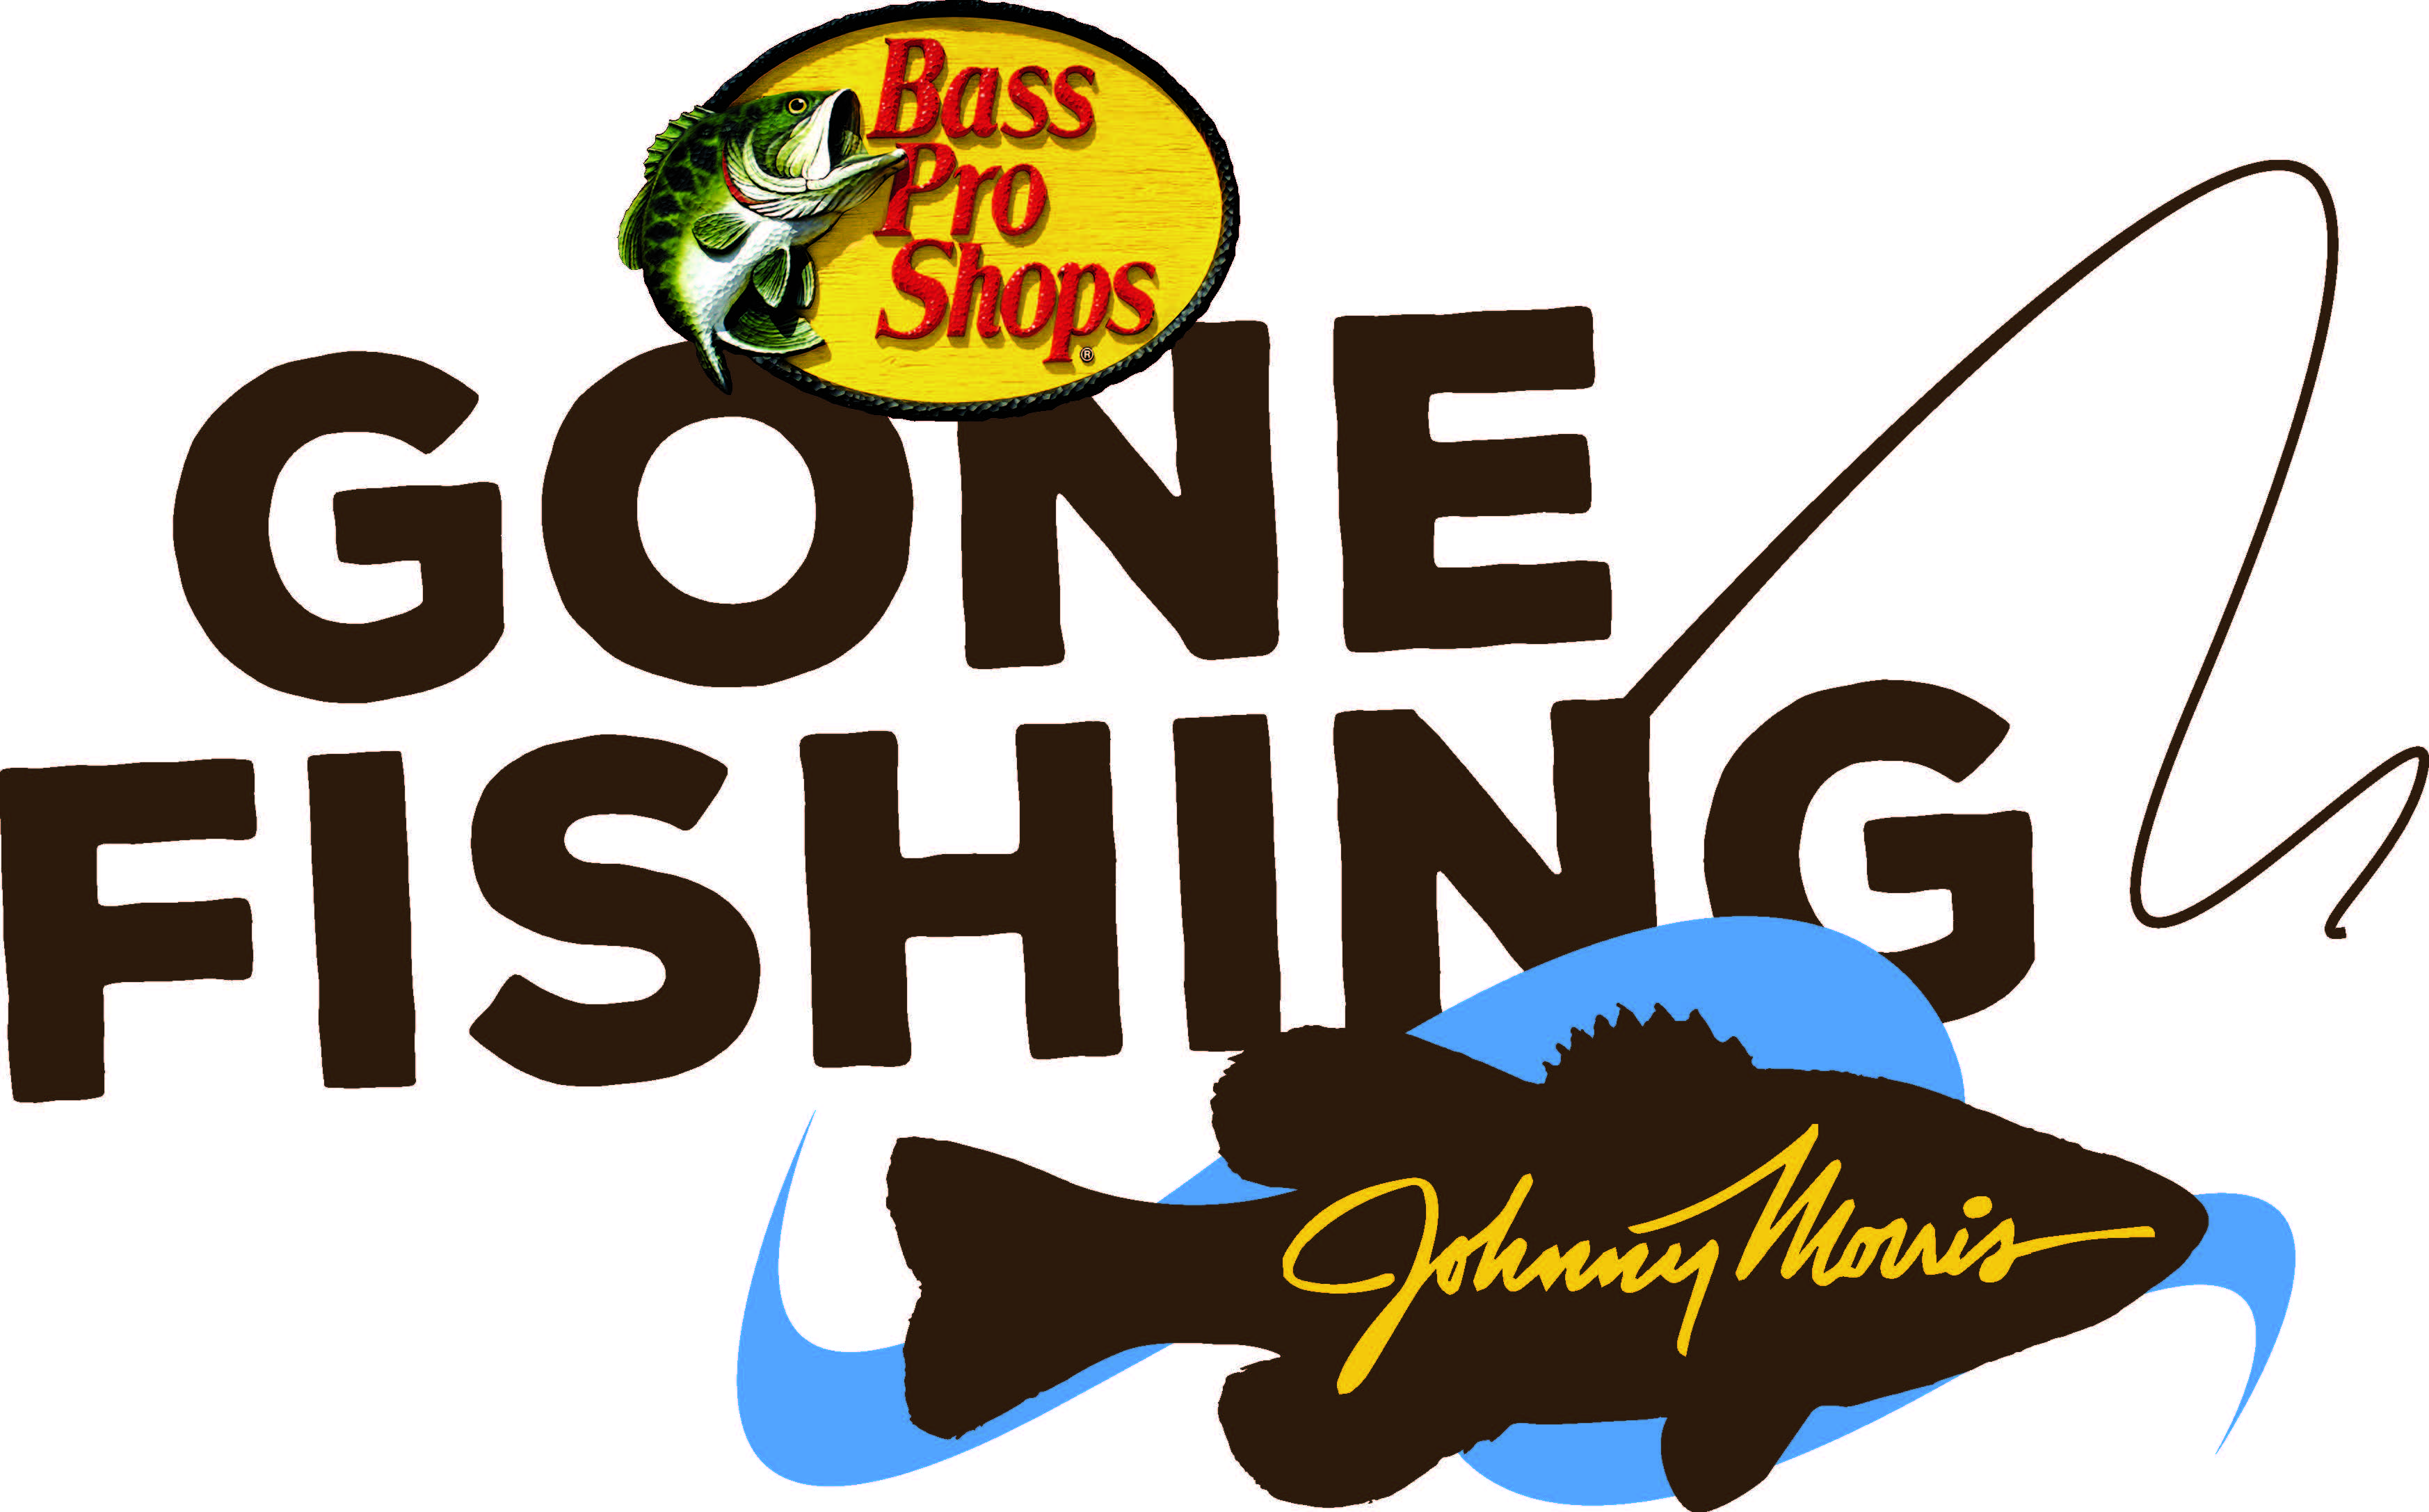 Johnny Morris and Bass Pro Shops donating 000 rods and reels